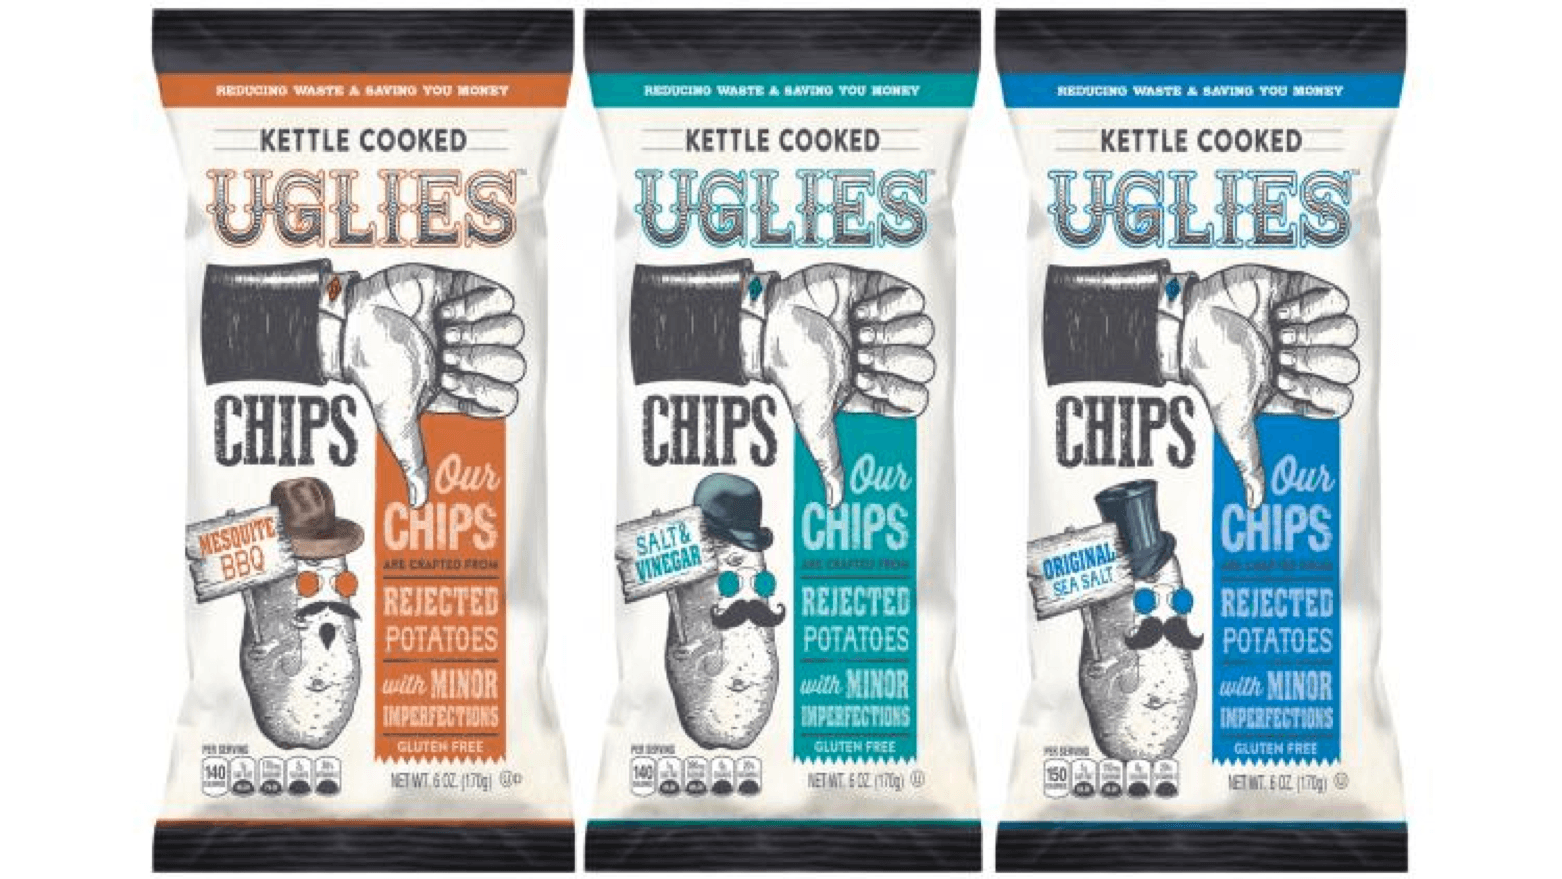 Pennsylvania snack purveyor Dieffenbach's Potato Chips created Uglies, kettle-cooked potato chips made from rejected potatoes.